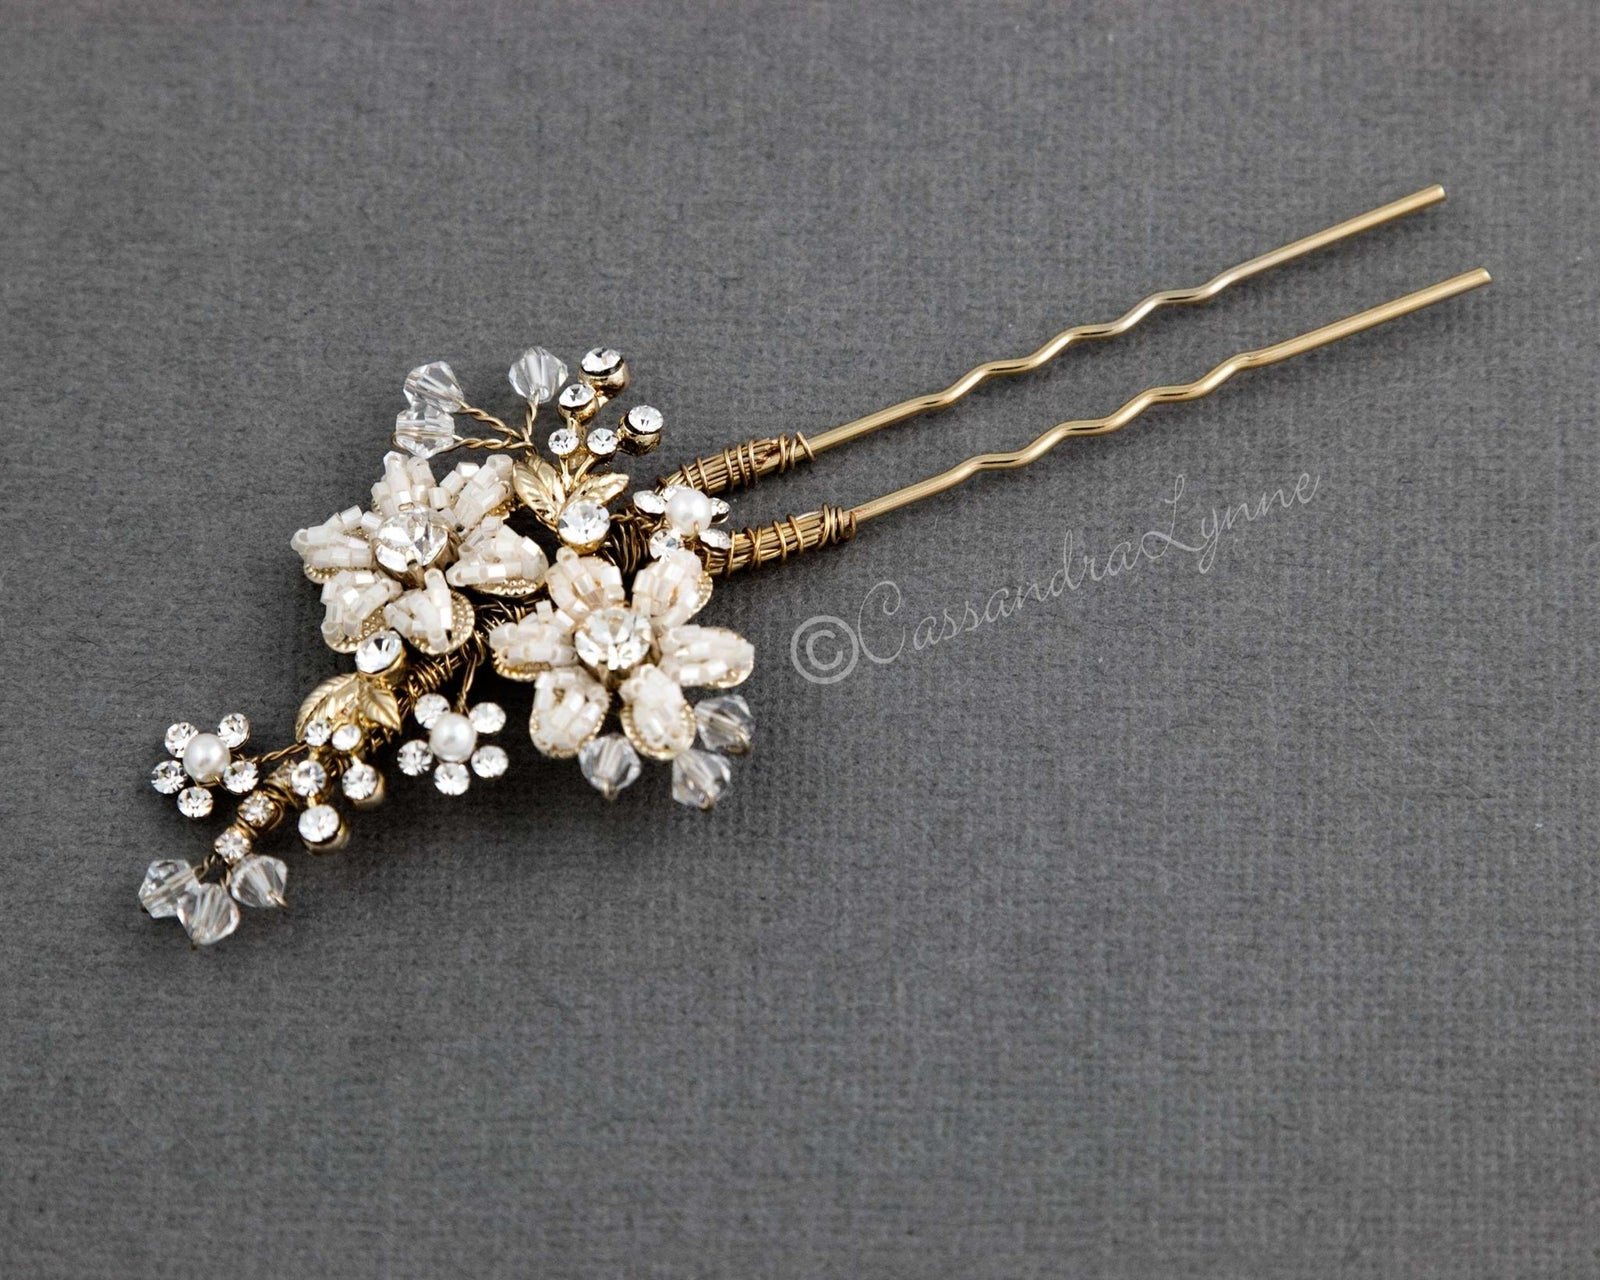 Crystal Wedding Hair Pin with Beaded Flowers